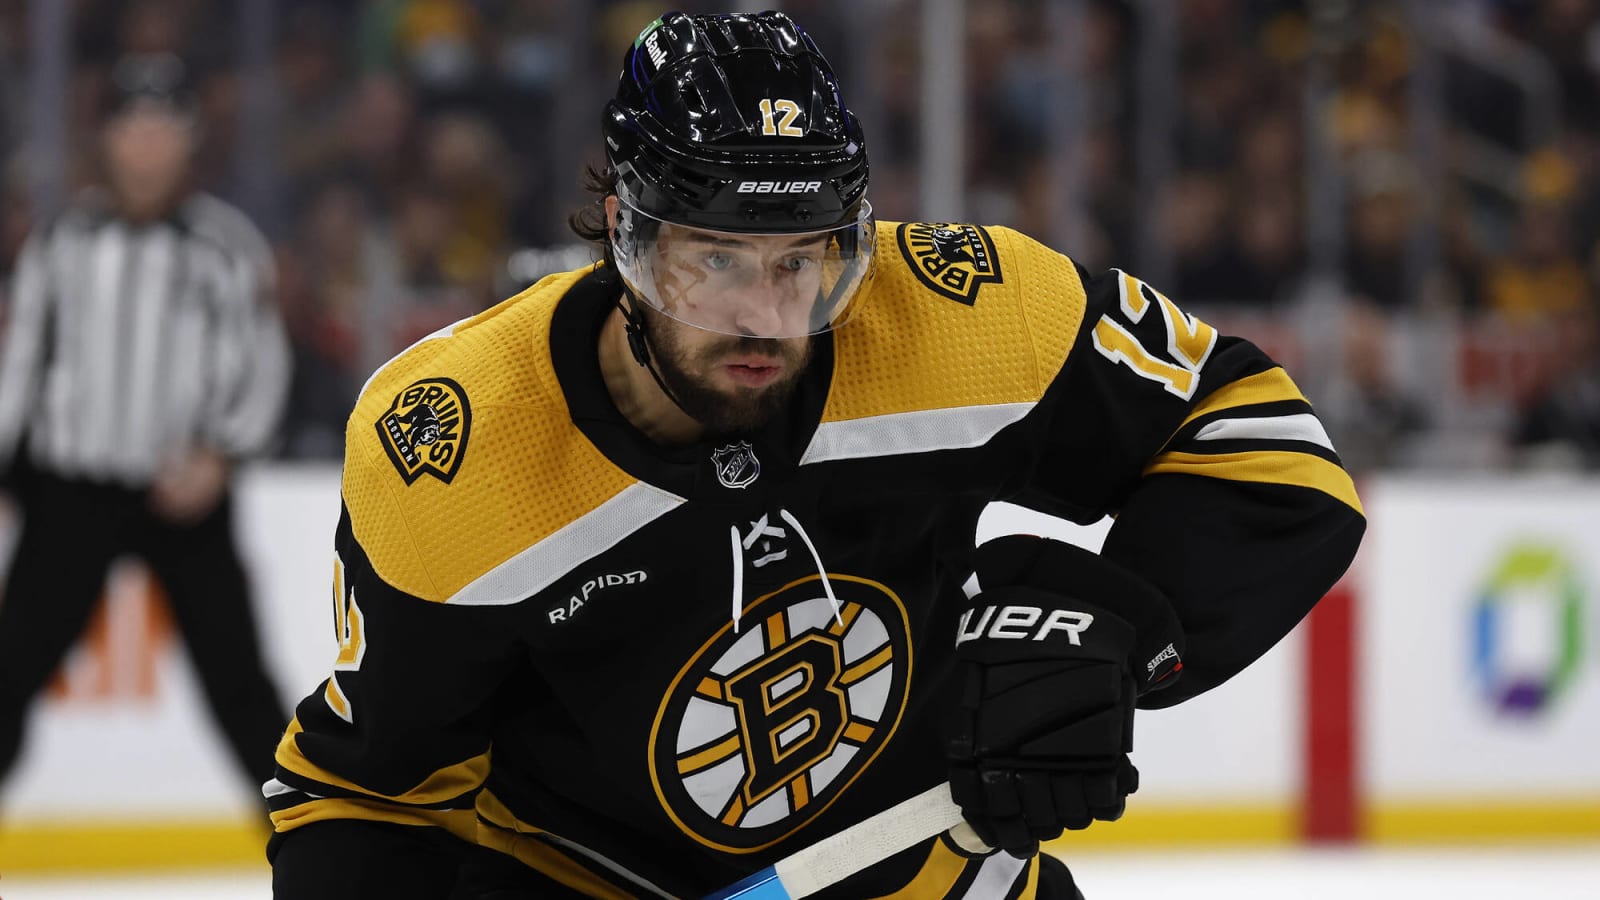 Report: Smith Placed On Waivers By Boston Bruins